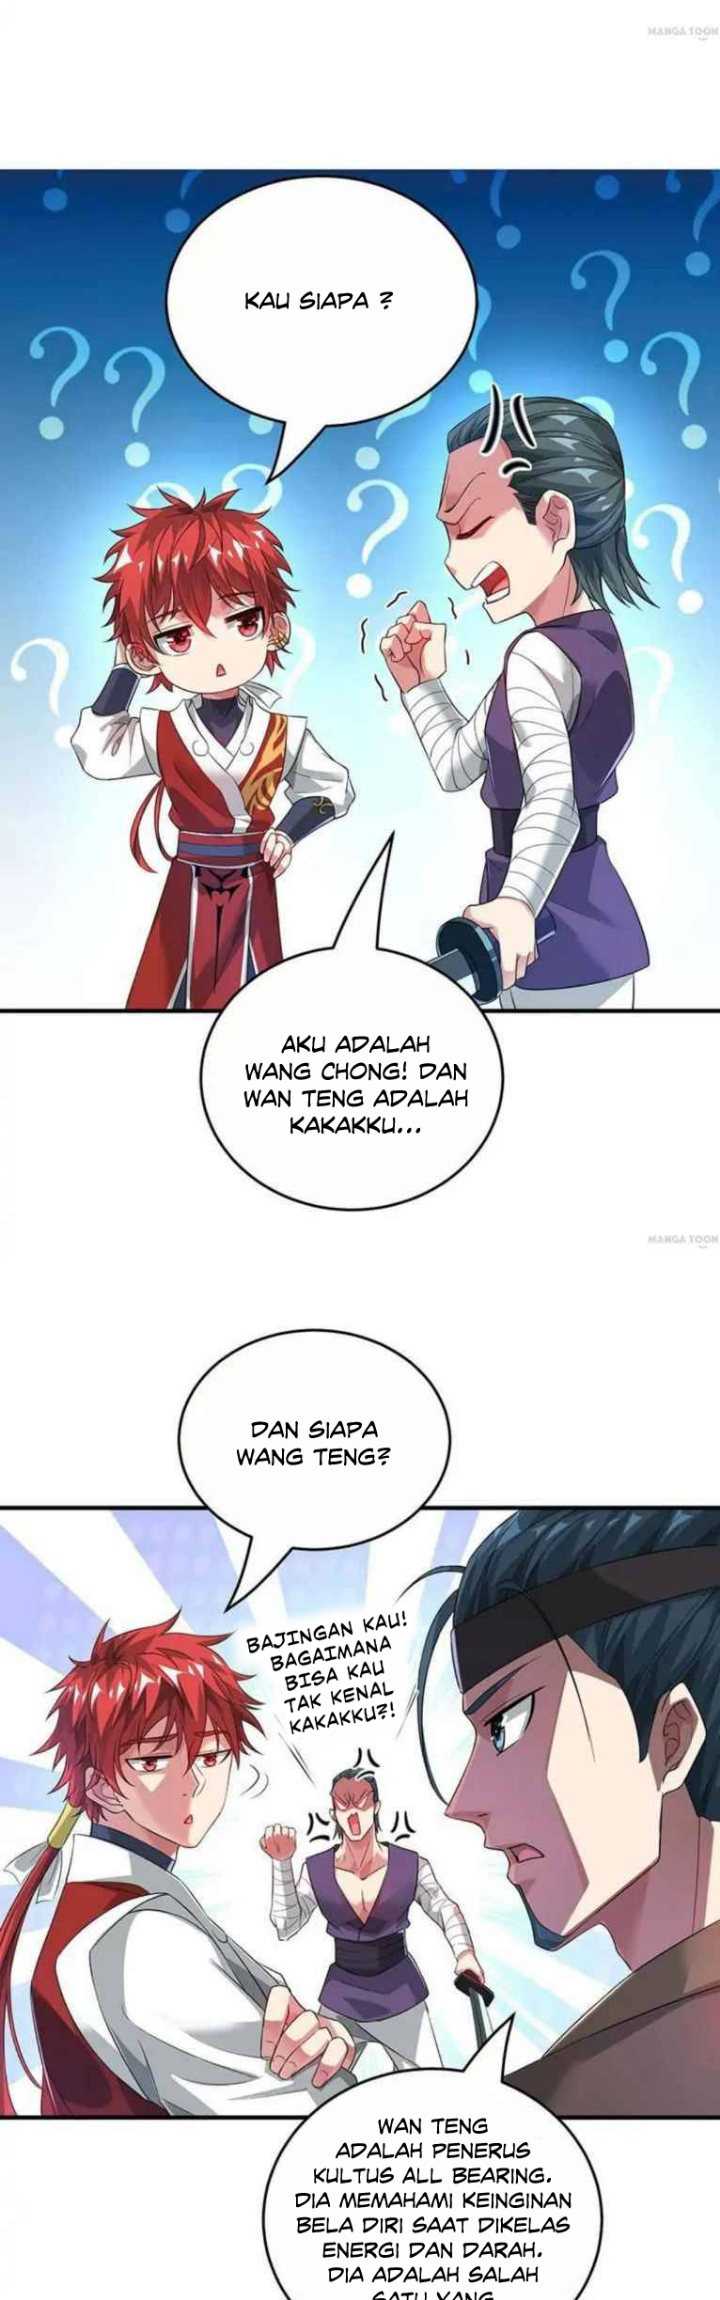 The First Son-In-Law Vanguard of All Time Chapter 217